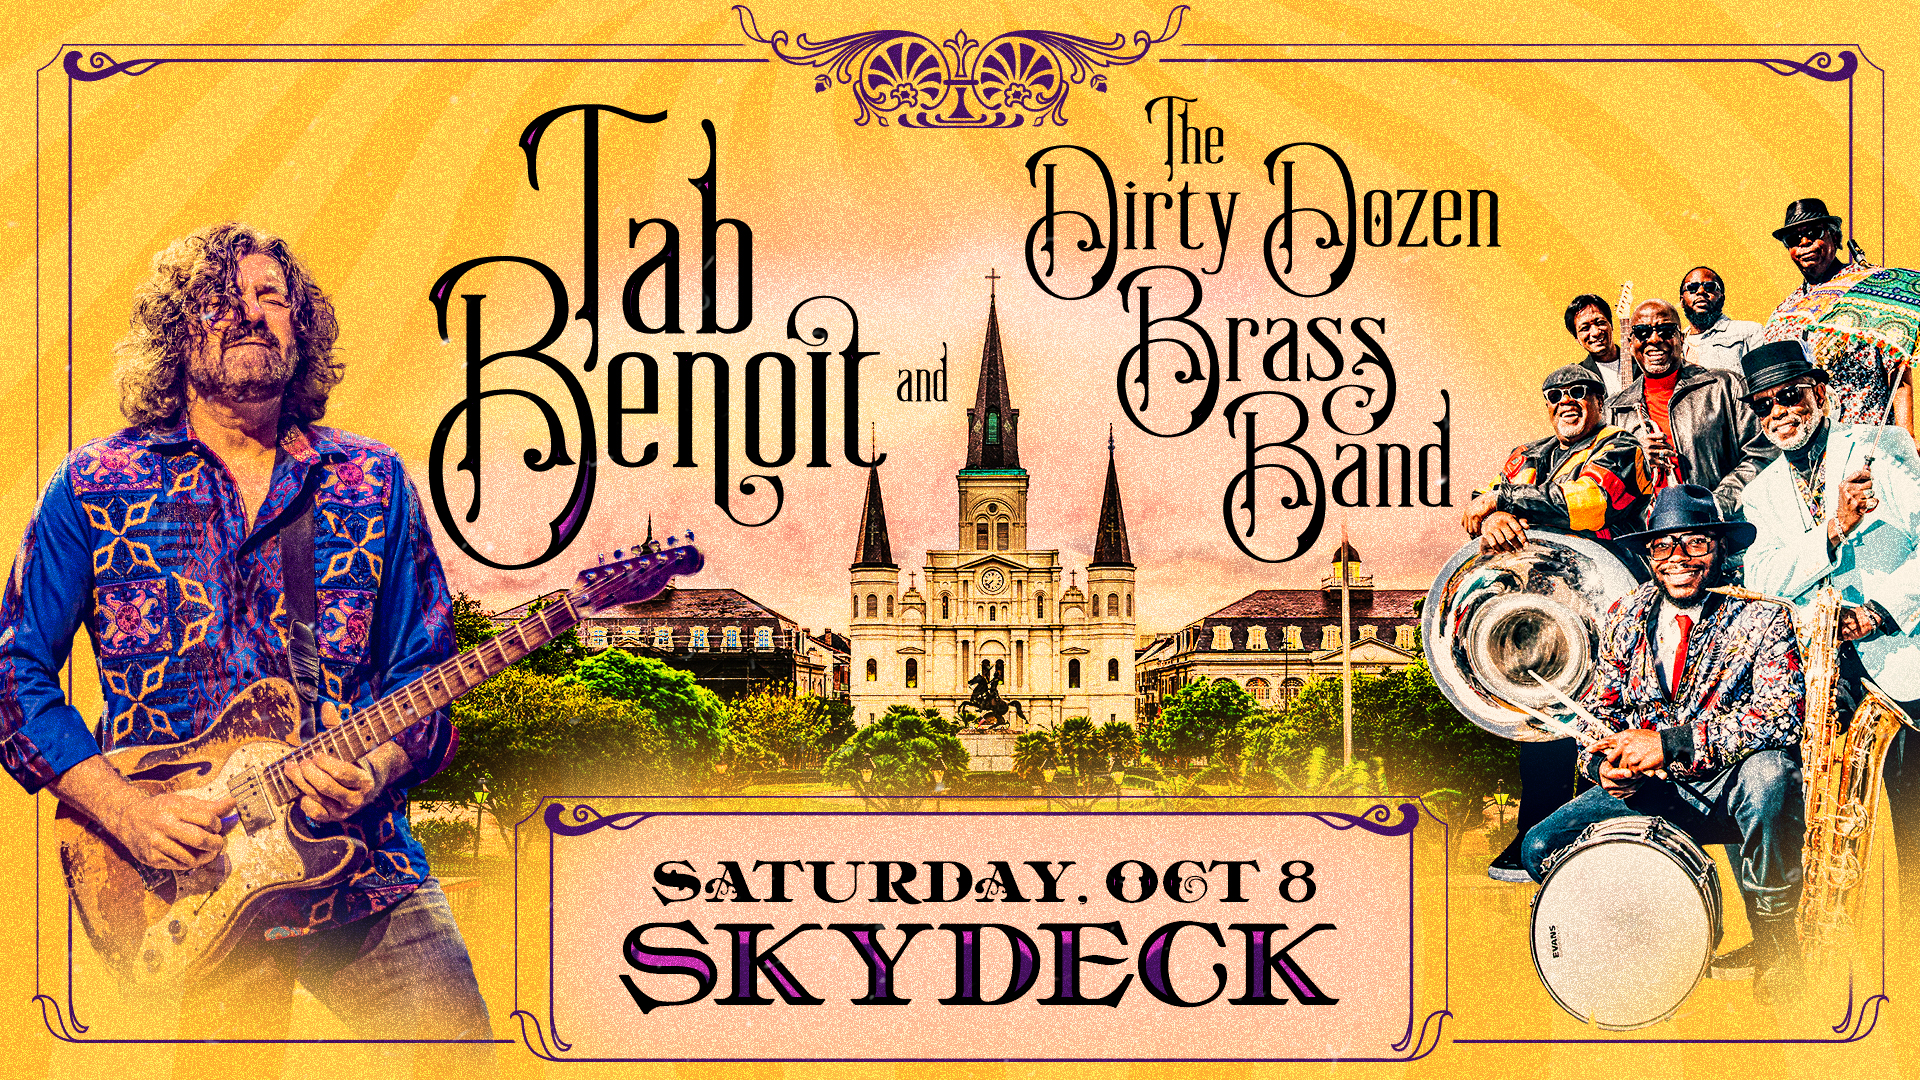 Tab Benoit with Special Guest Dirty Dozen Brass Band on Skydeck - hero